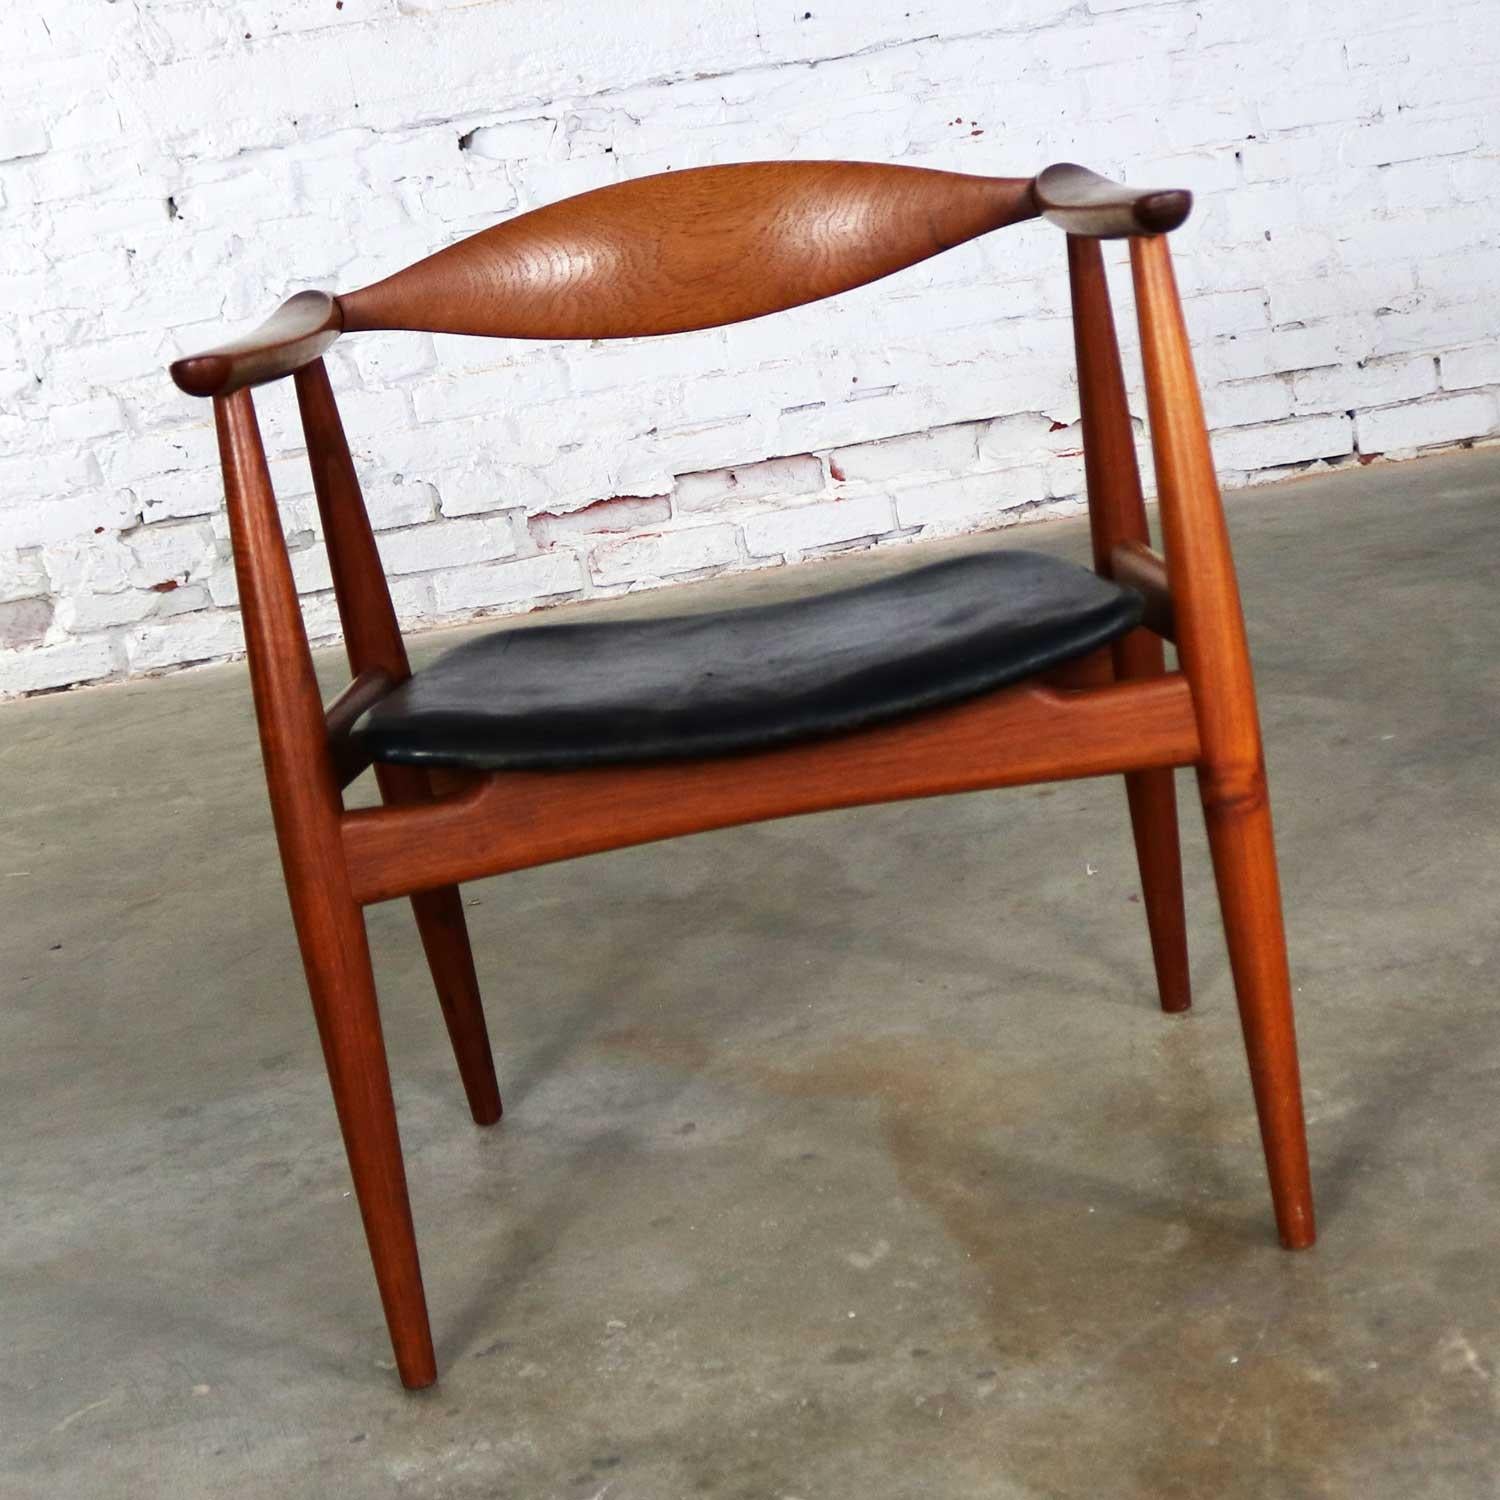 Handsome and iconic Scandinavian Modern CH 35 armchair designed by Hans Wegner for Carl Hansen and Son, Denmark. Their mark is present on the underside of the chair. This gorgeous chair is in wonderful vintage condition overall. Its beautiful teak